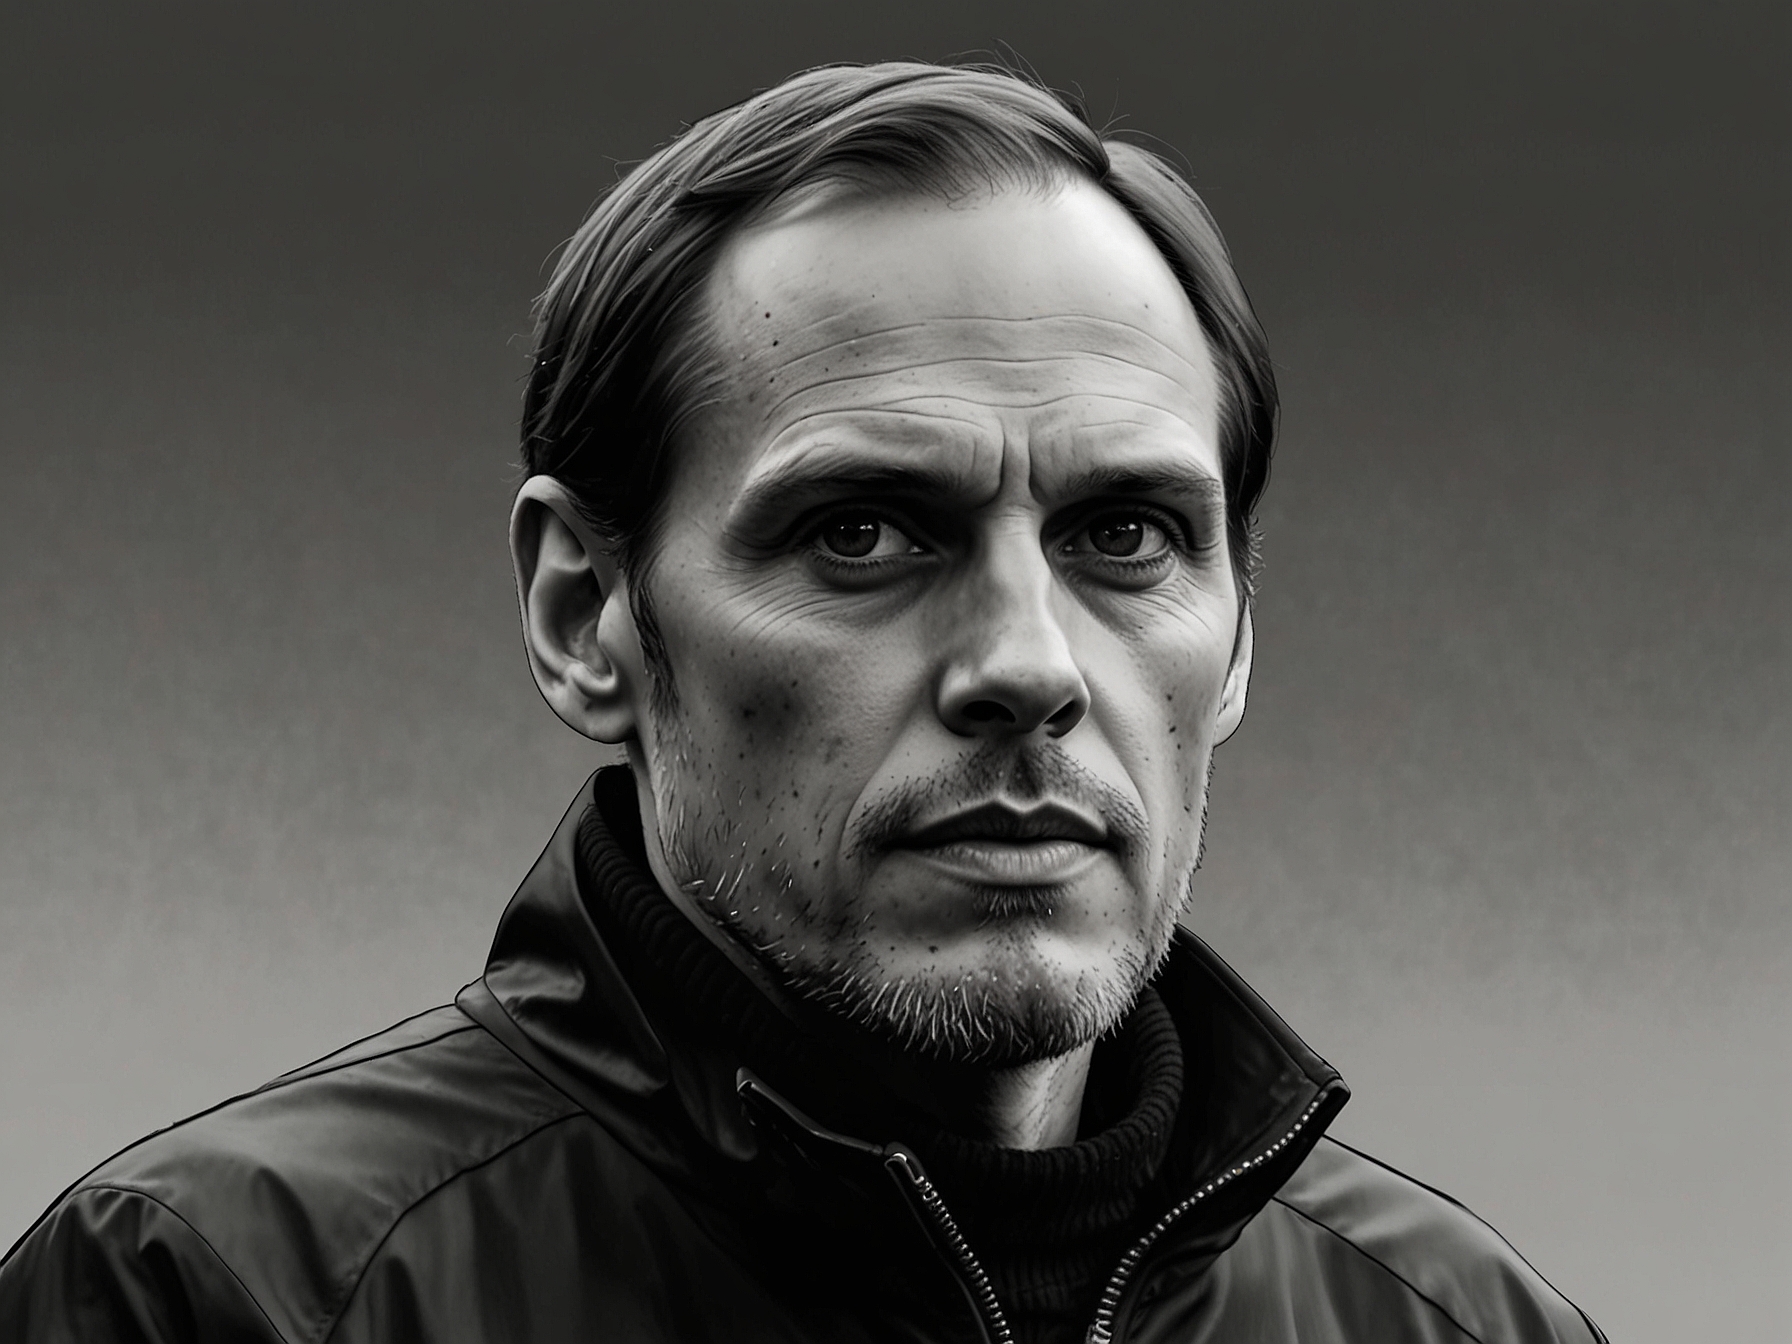 Thomas Tuchel, the manager who was considered for the Manchester United managerial position.